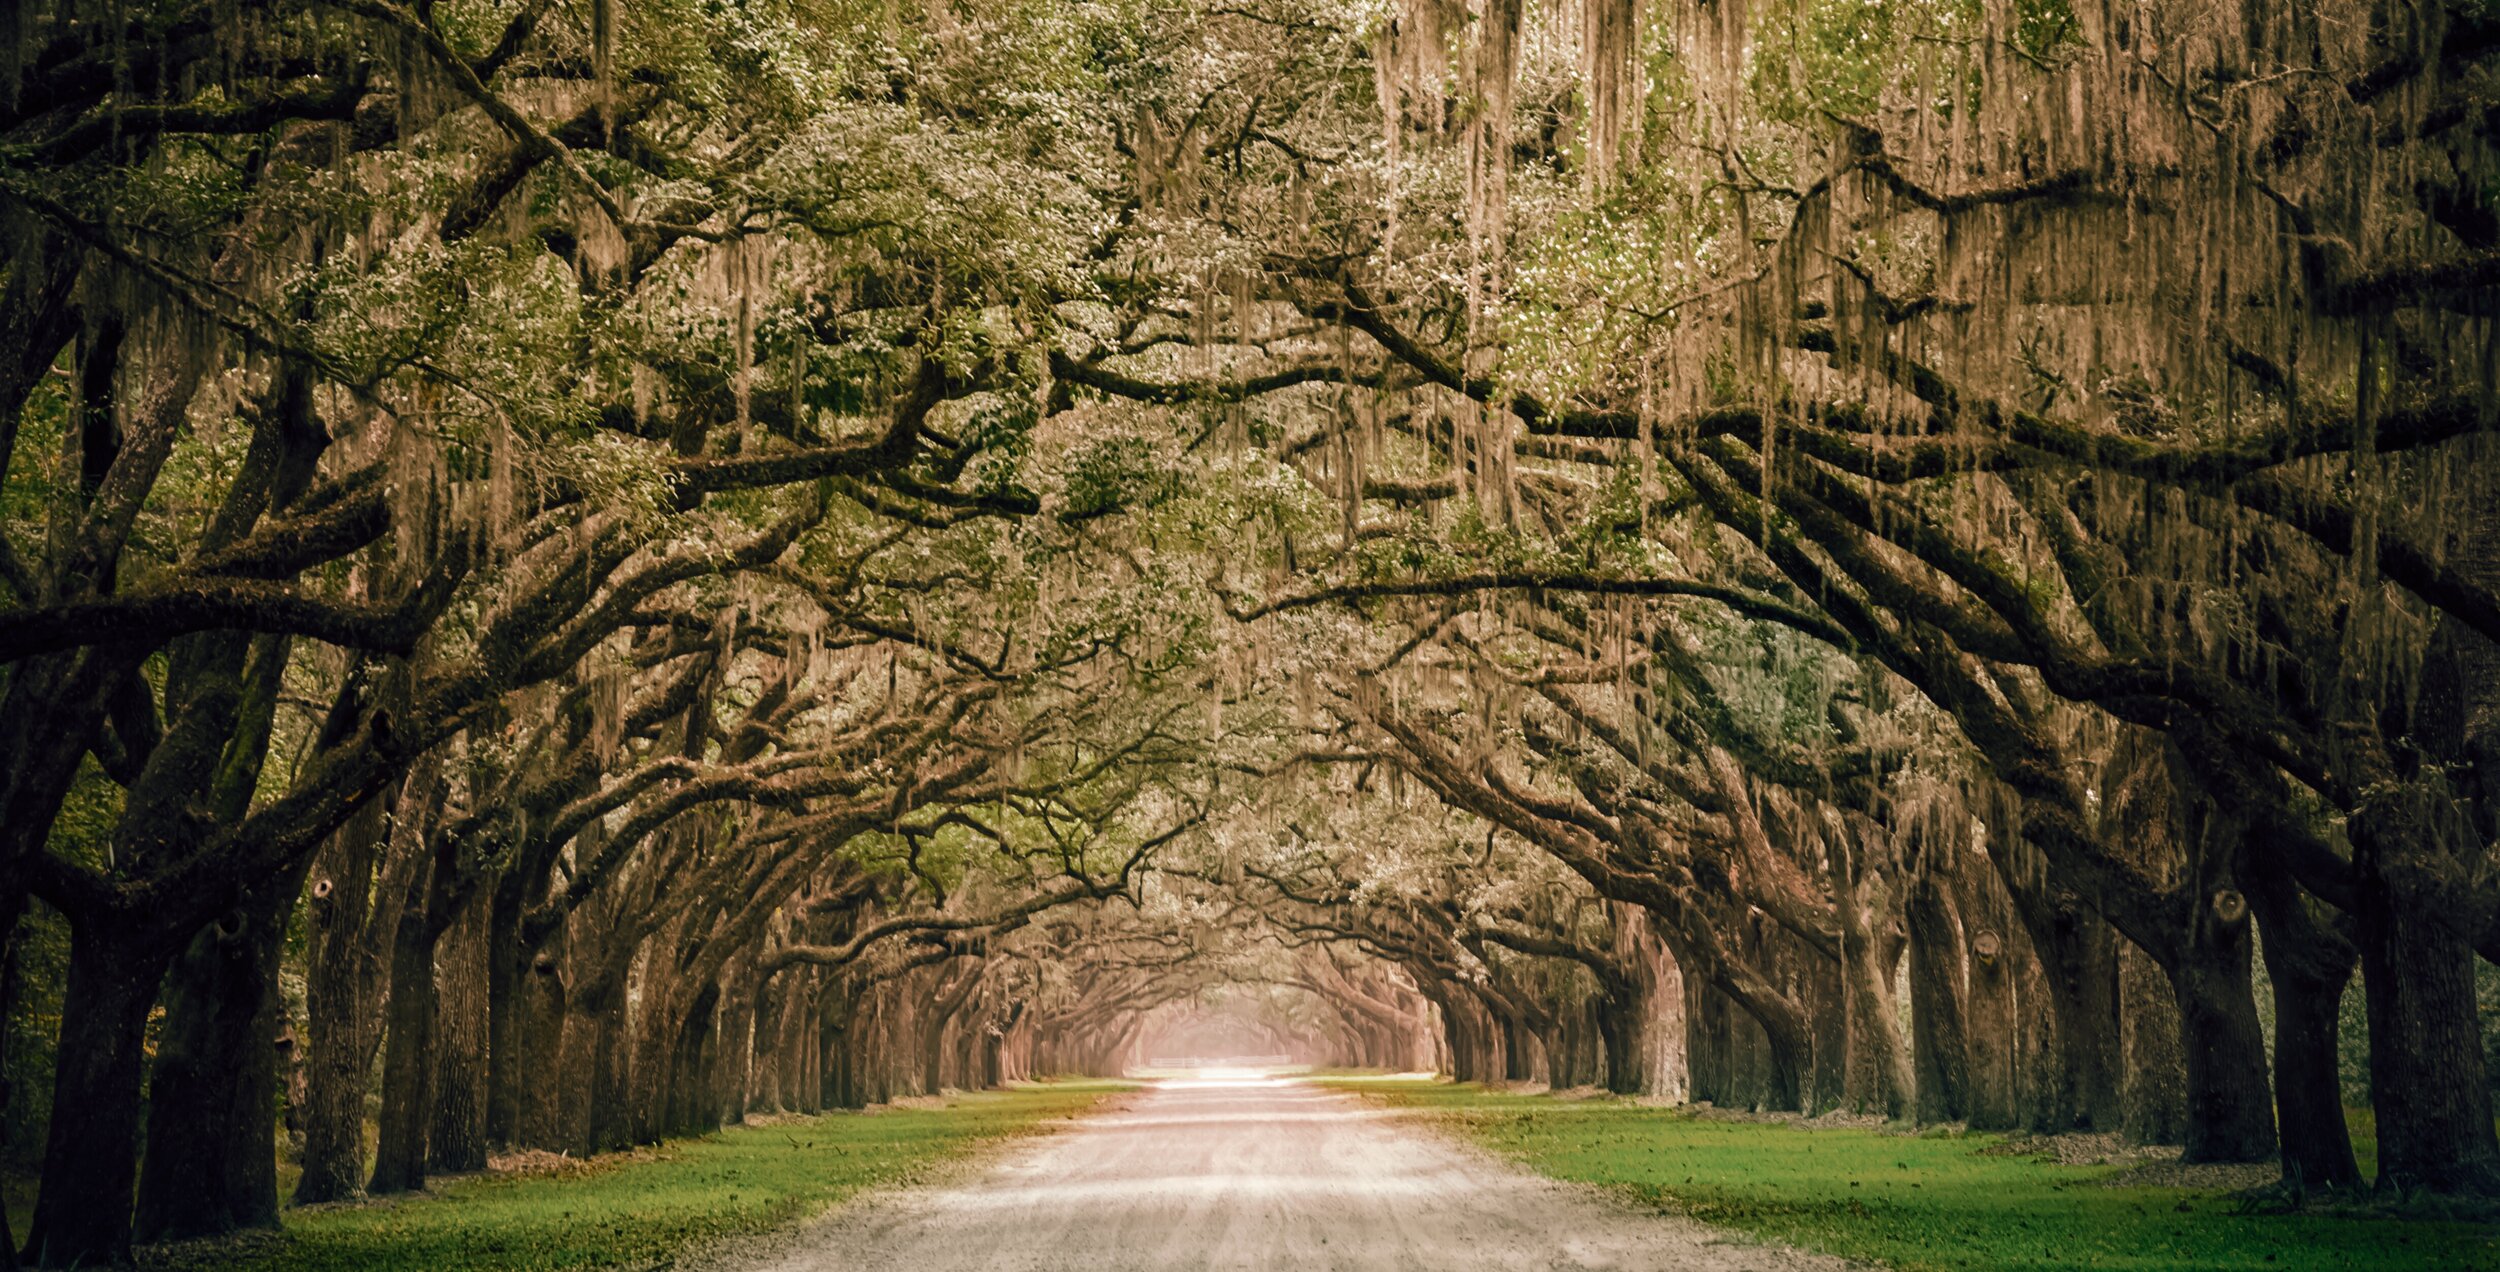 one-of-the-most-beautiful-plantations-i-have-ever-seen-the-historic-wormsloe-plantation-in-savannah_t20_JlP6Kl.jpg